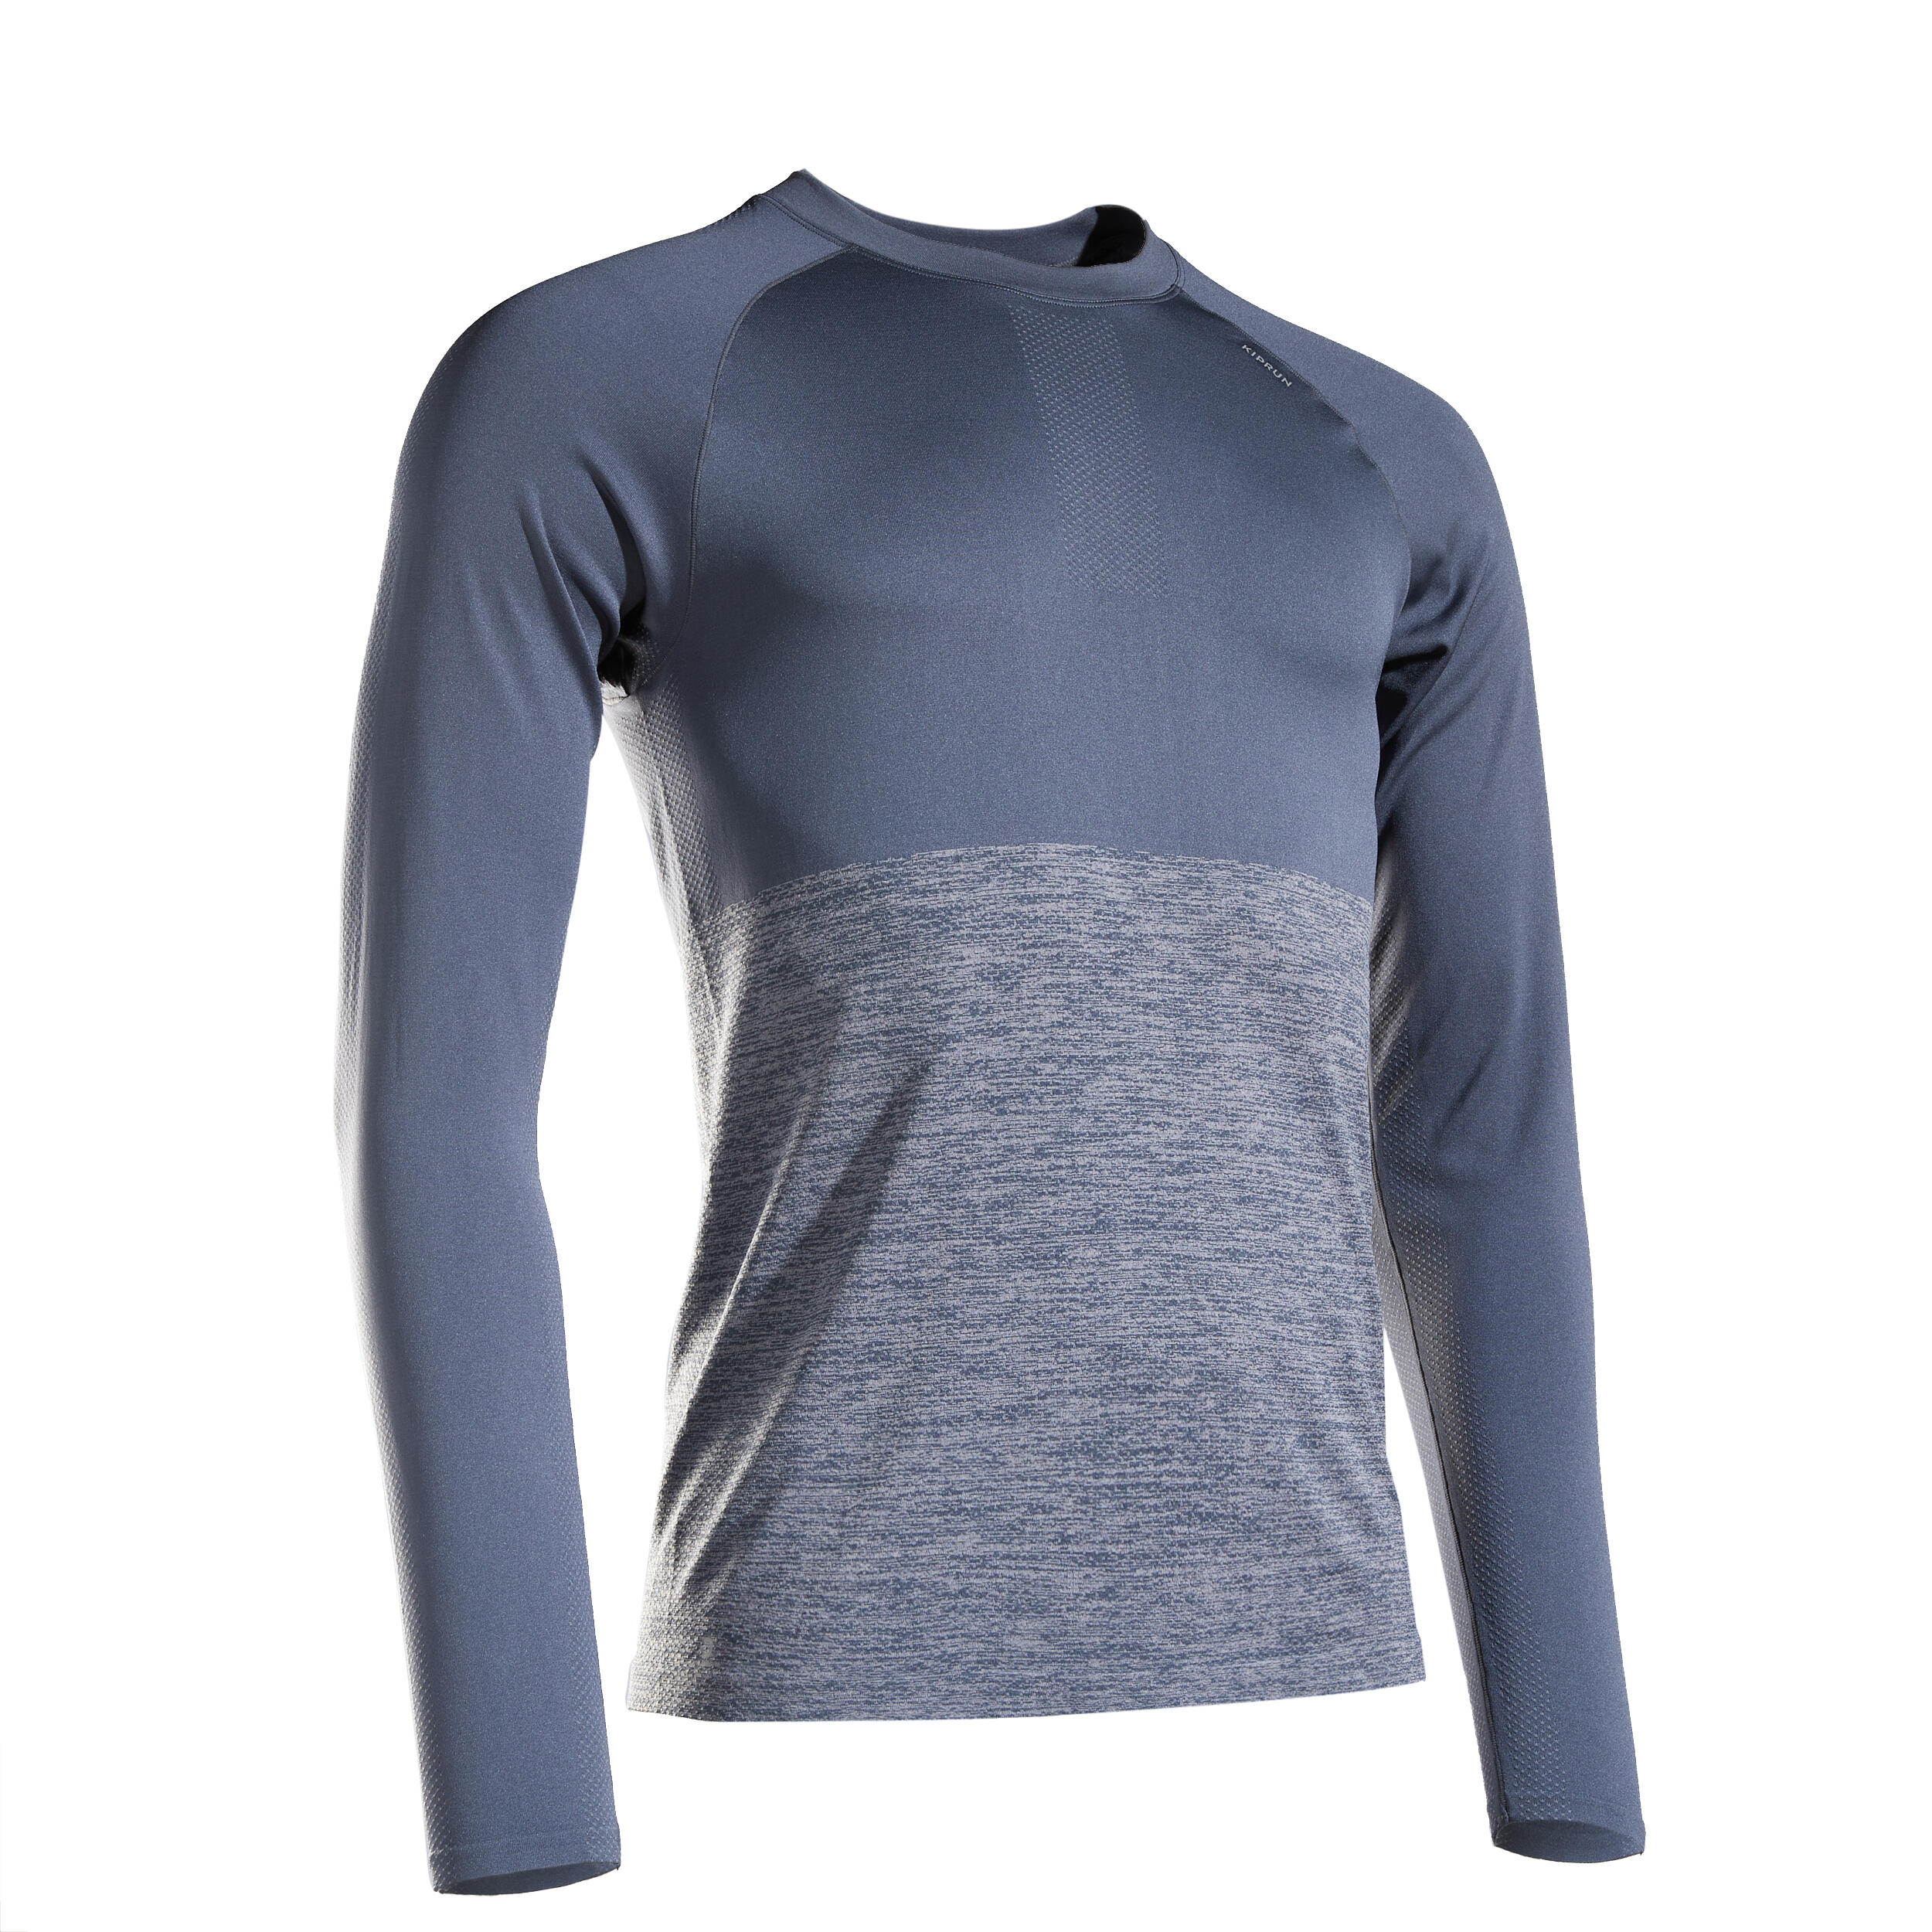 CARE MEN'S BREATHABLE LONG-SLEEVED RUNNING T-SHIRT - GREY LIMITED EDITION 9/9